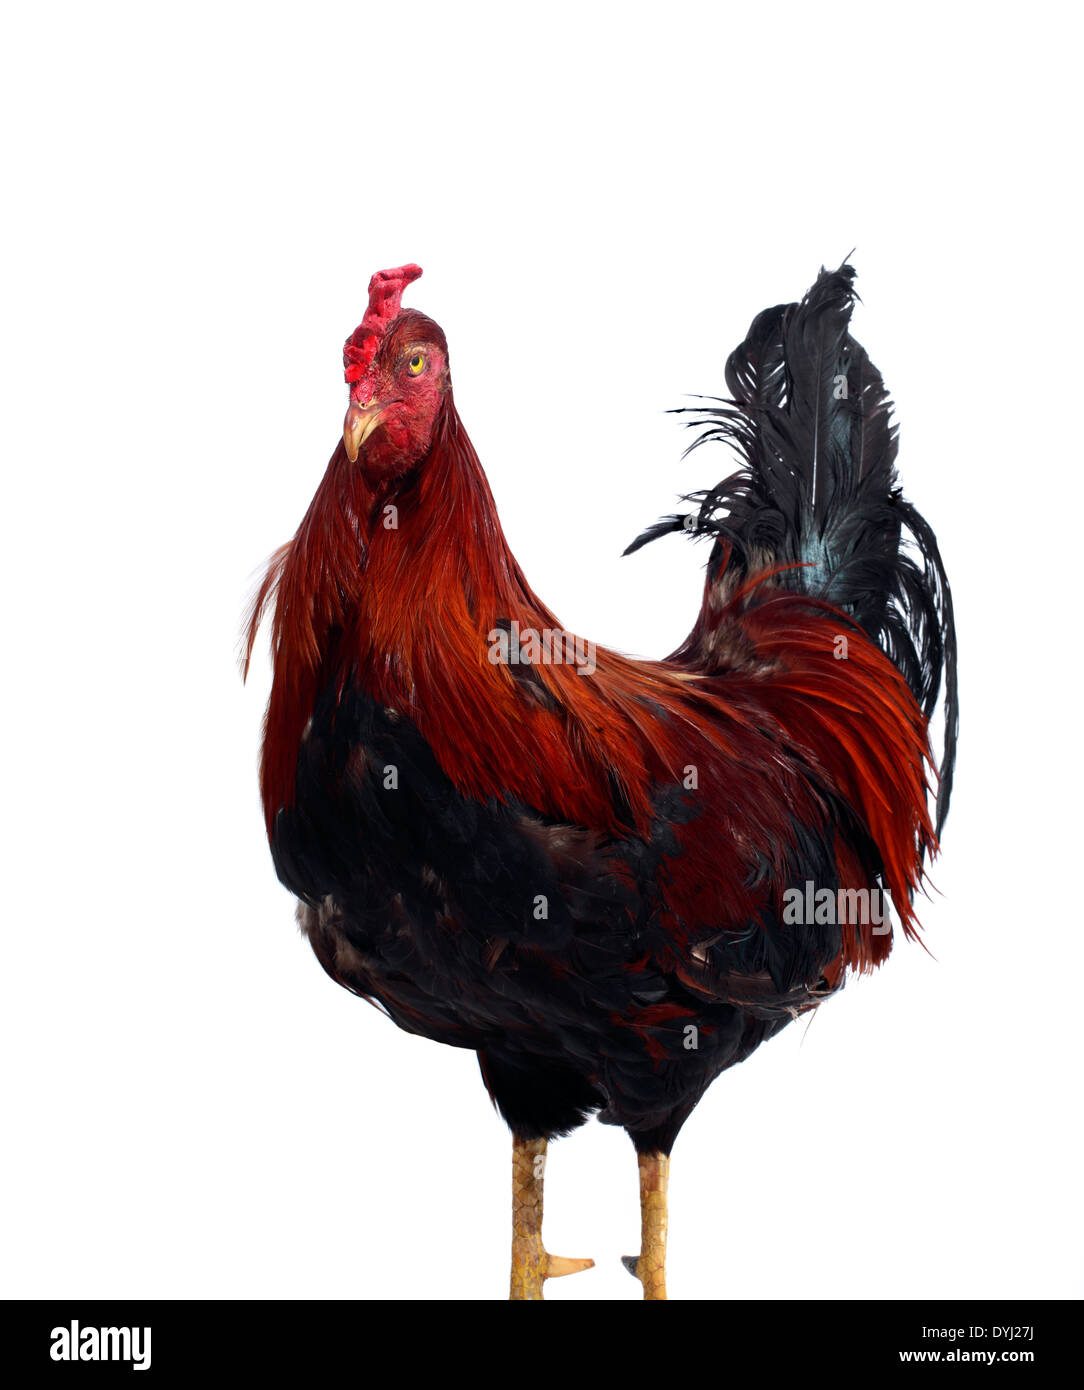 Studio shot of a Portrait of a Rooster or Chicken Stock Photo